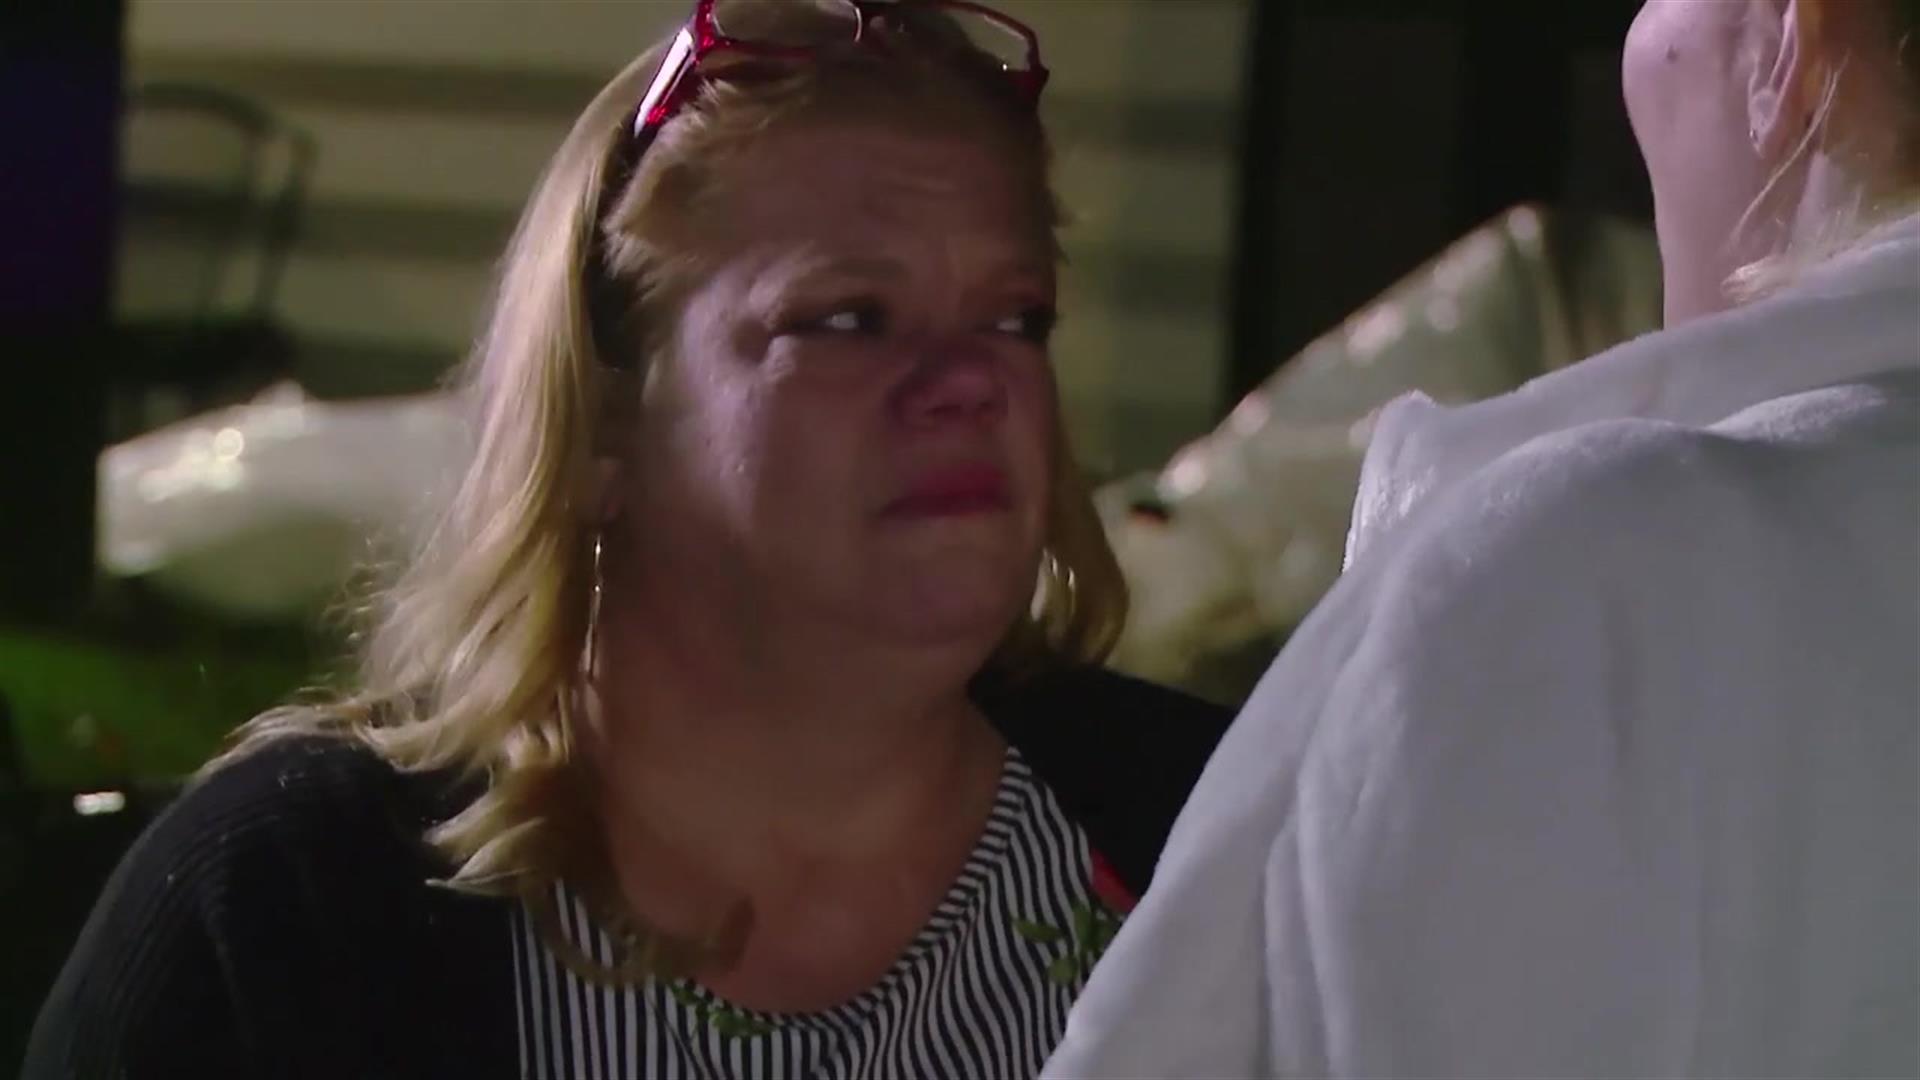 Watch Brittany Is Ready to End a Vicious Family Cycle | Life After Lockup Video Extras